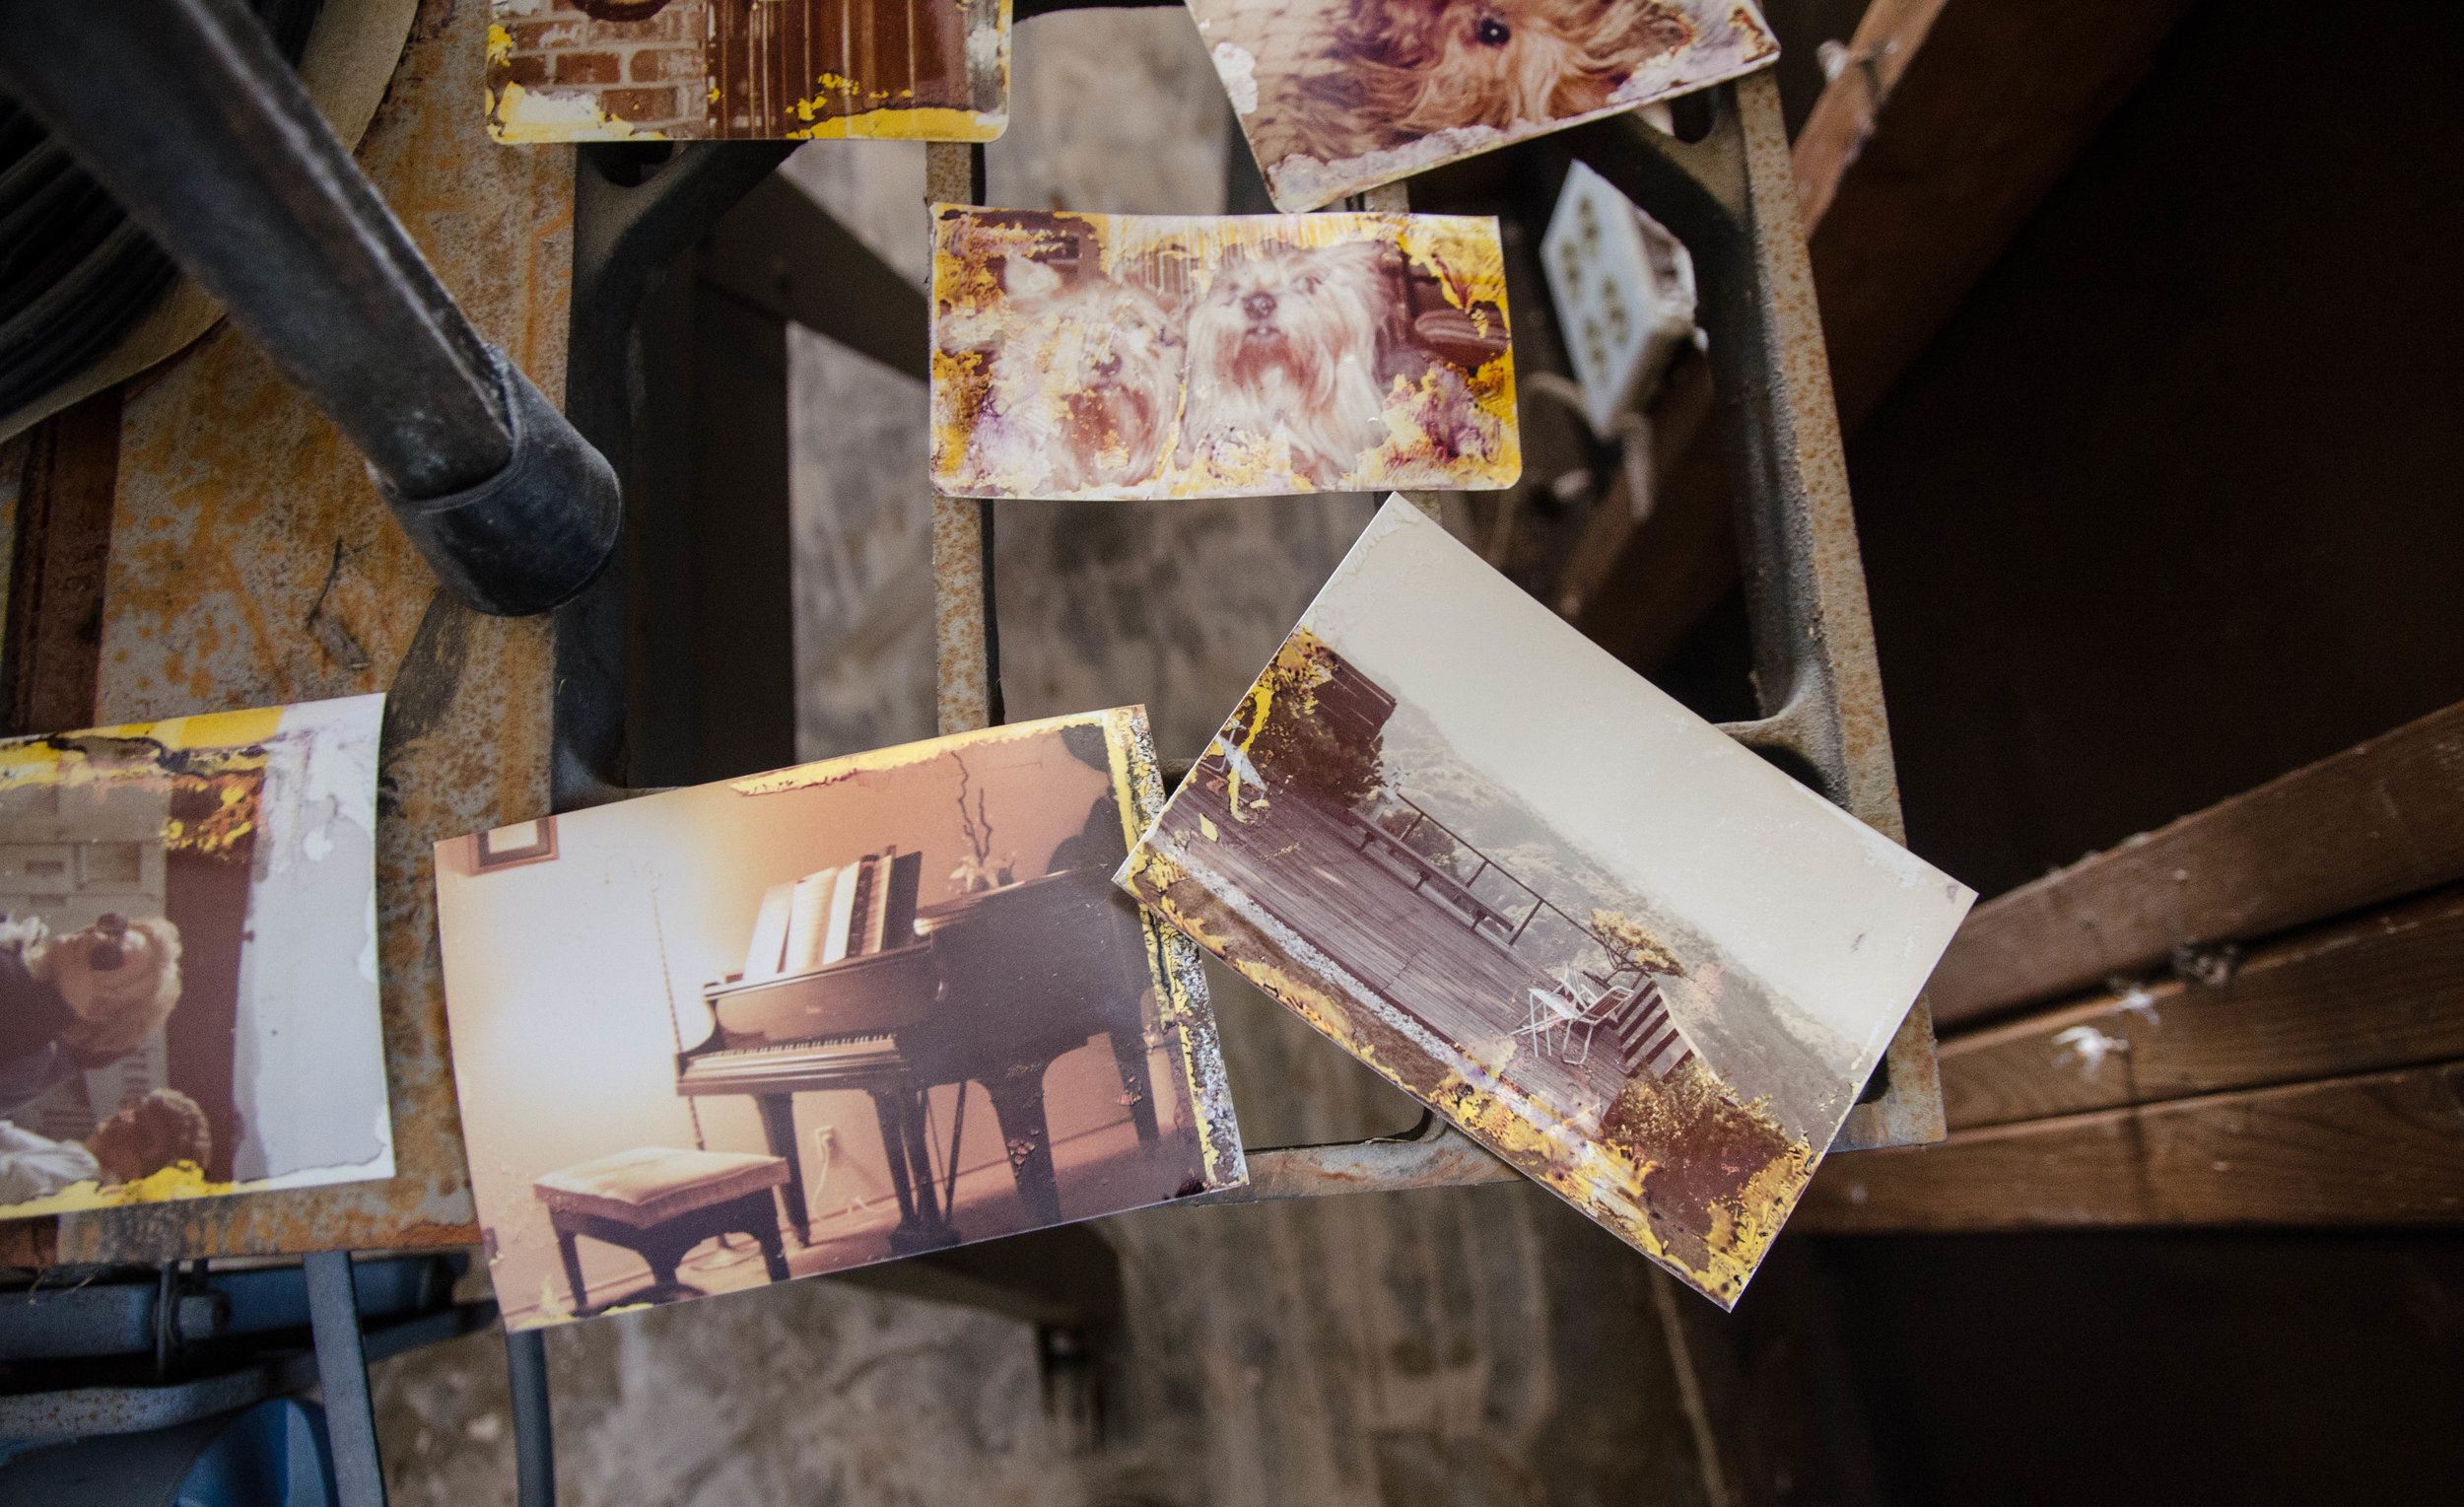  Flood damaged family photographs are spread out to dry around the house. 